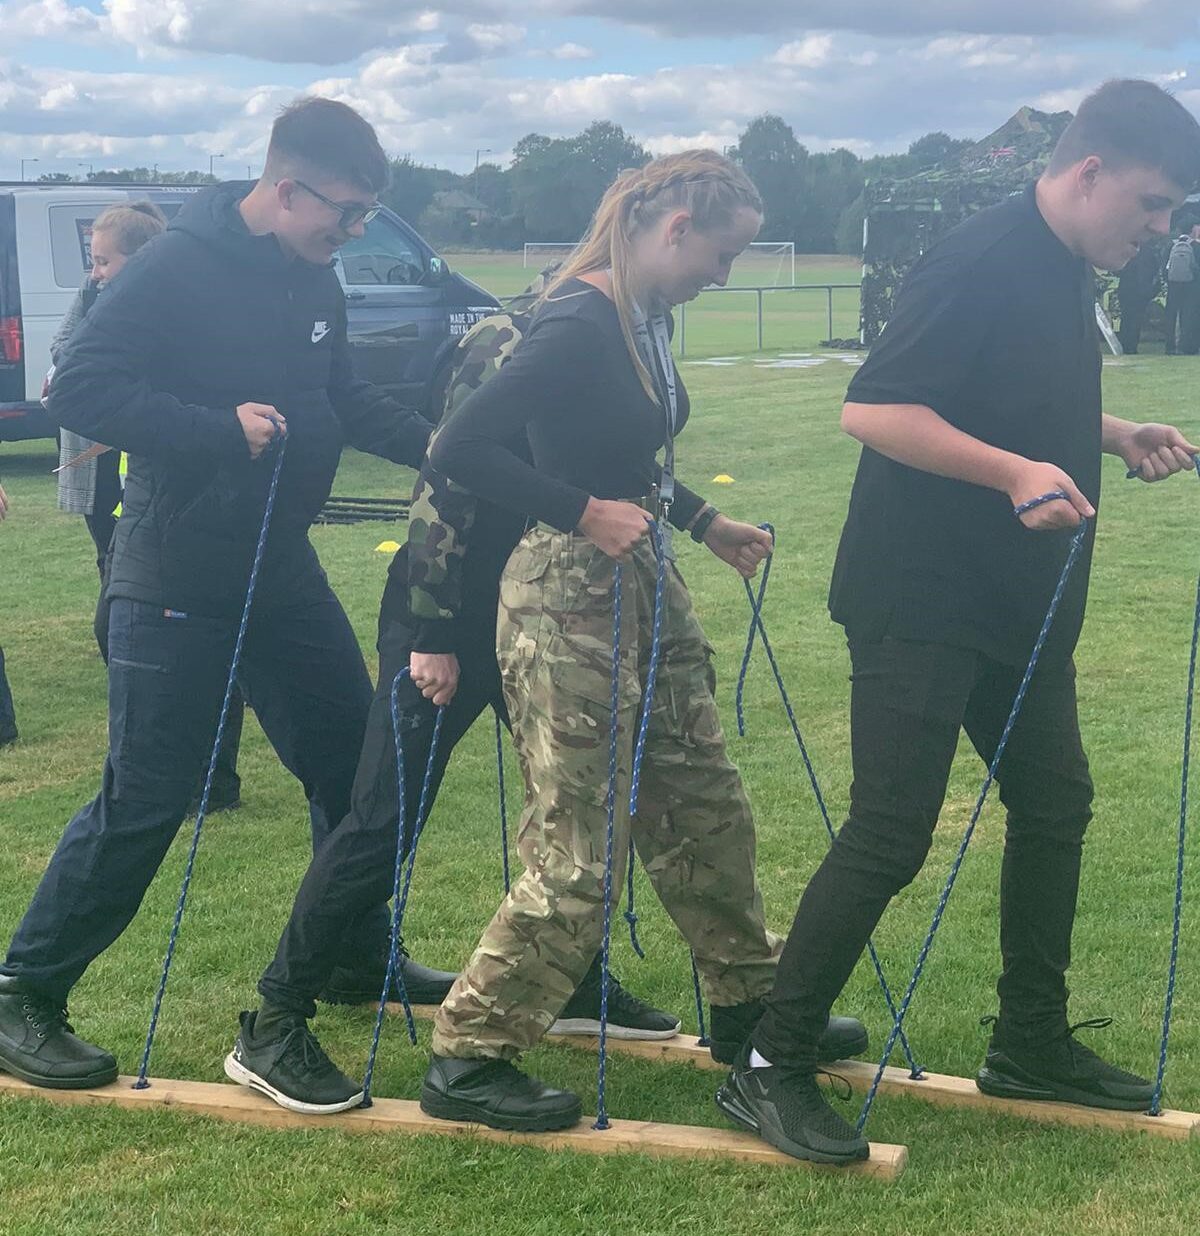 Students at the DRIVE initiative community event take part in a practical teamwork activity using ropes and planks, to move forward together